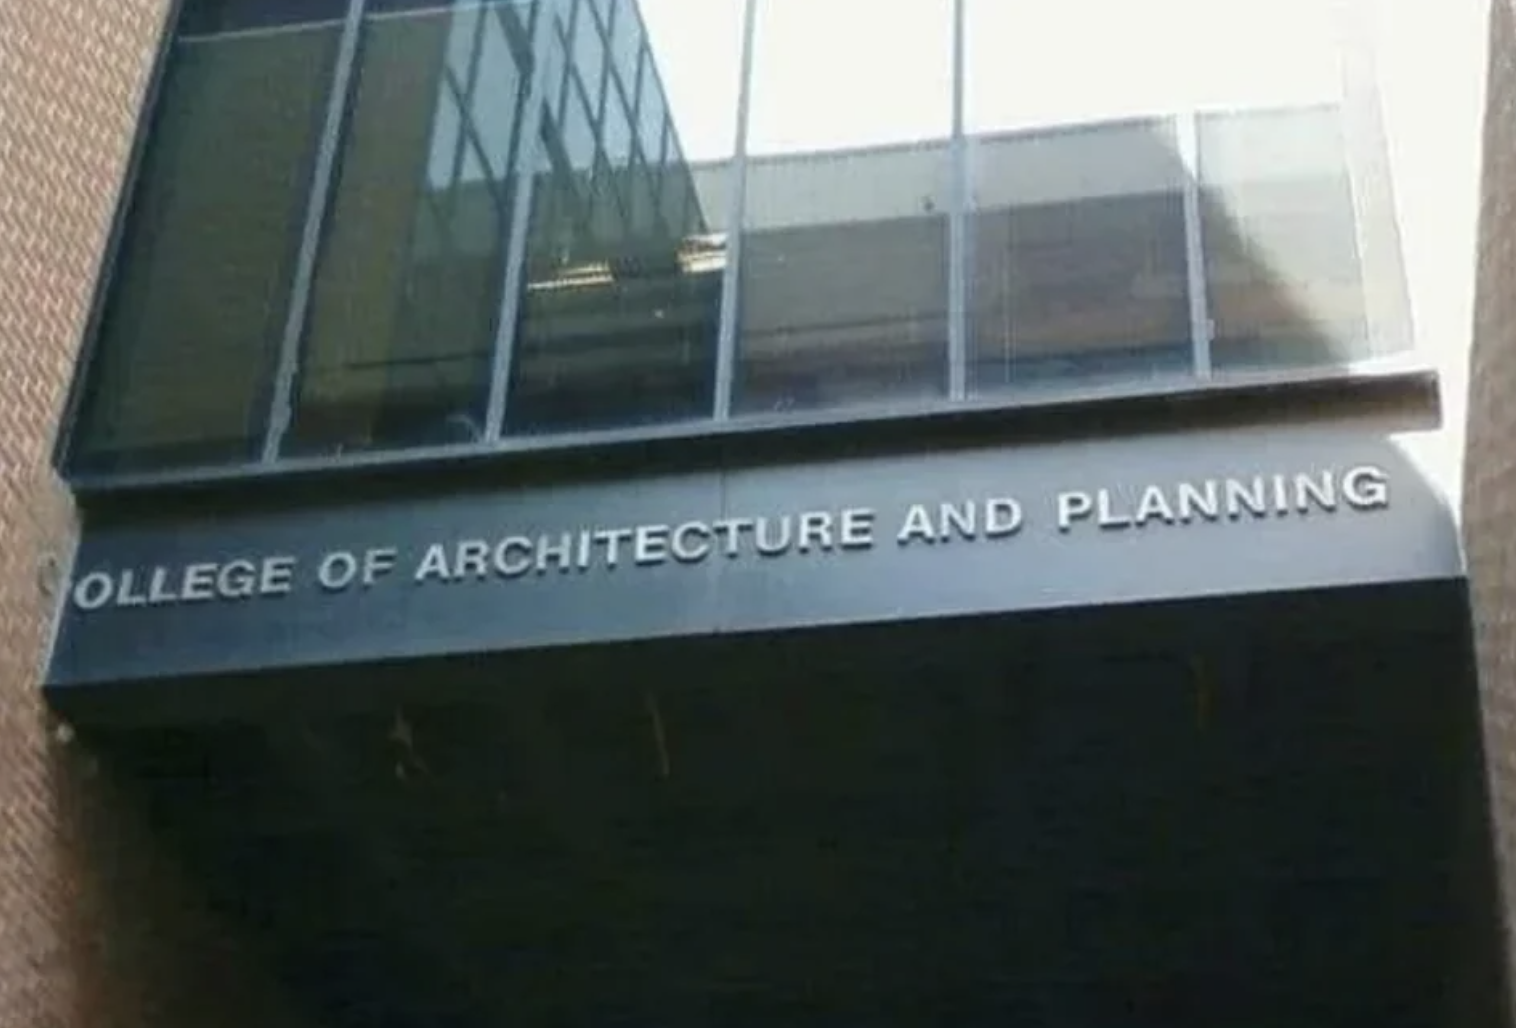 &quot;ollege of Architecture and Planning&quot; sign with the &quot;C&quot; missing because it&#x27;s not wide enough